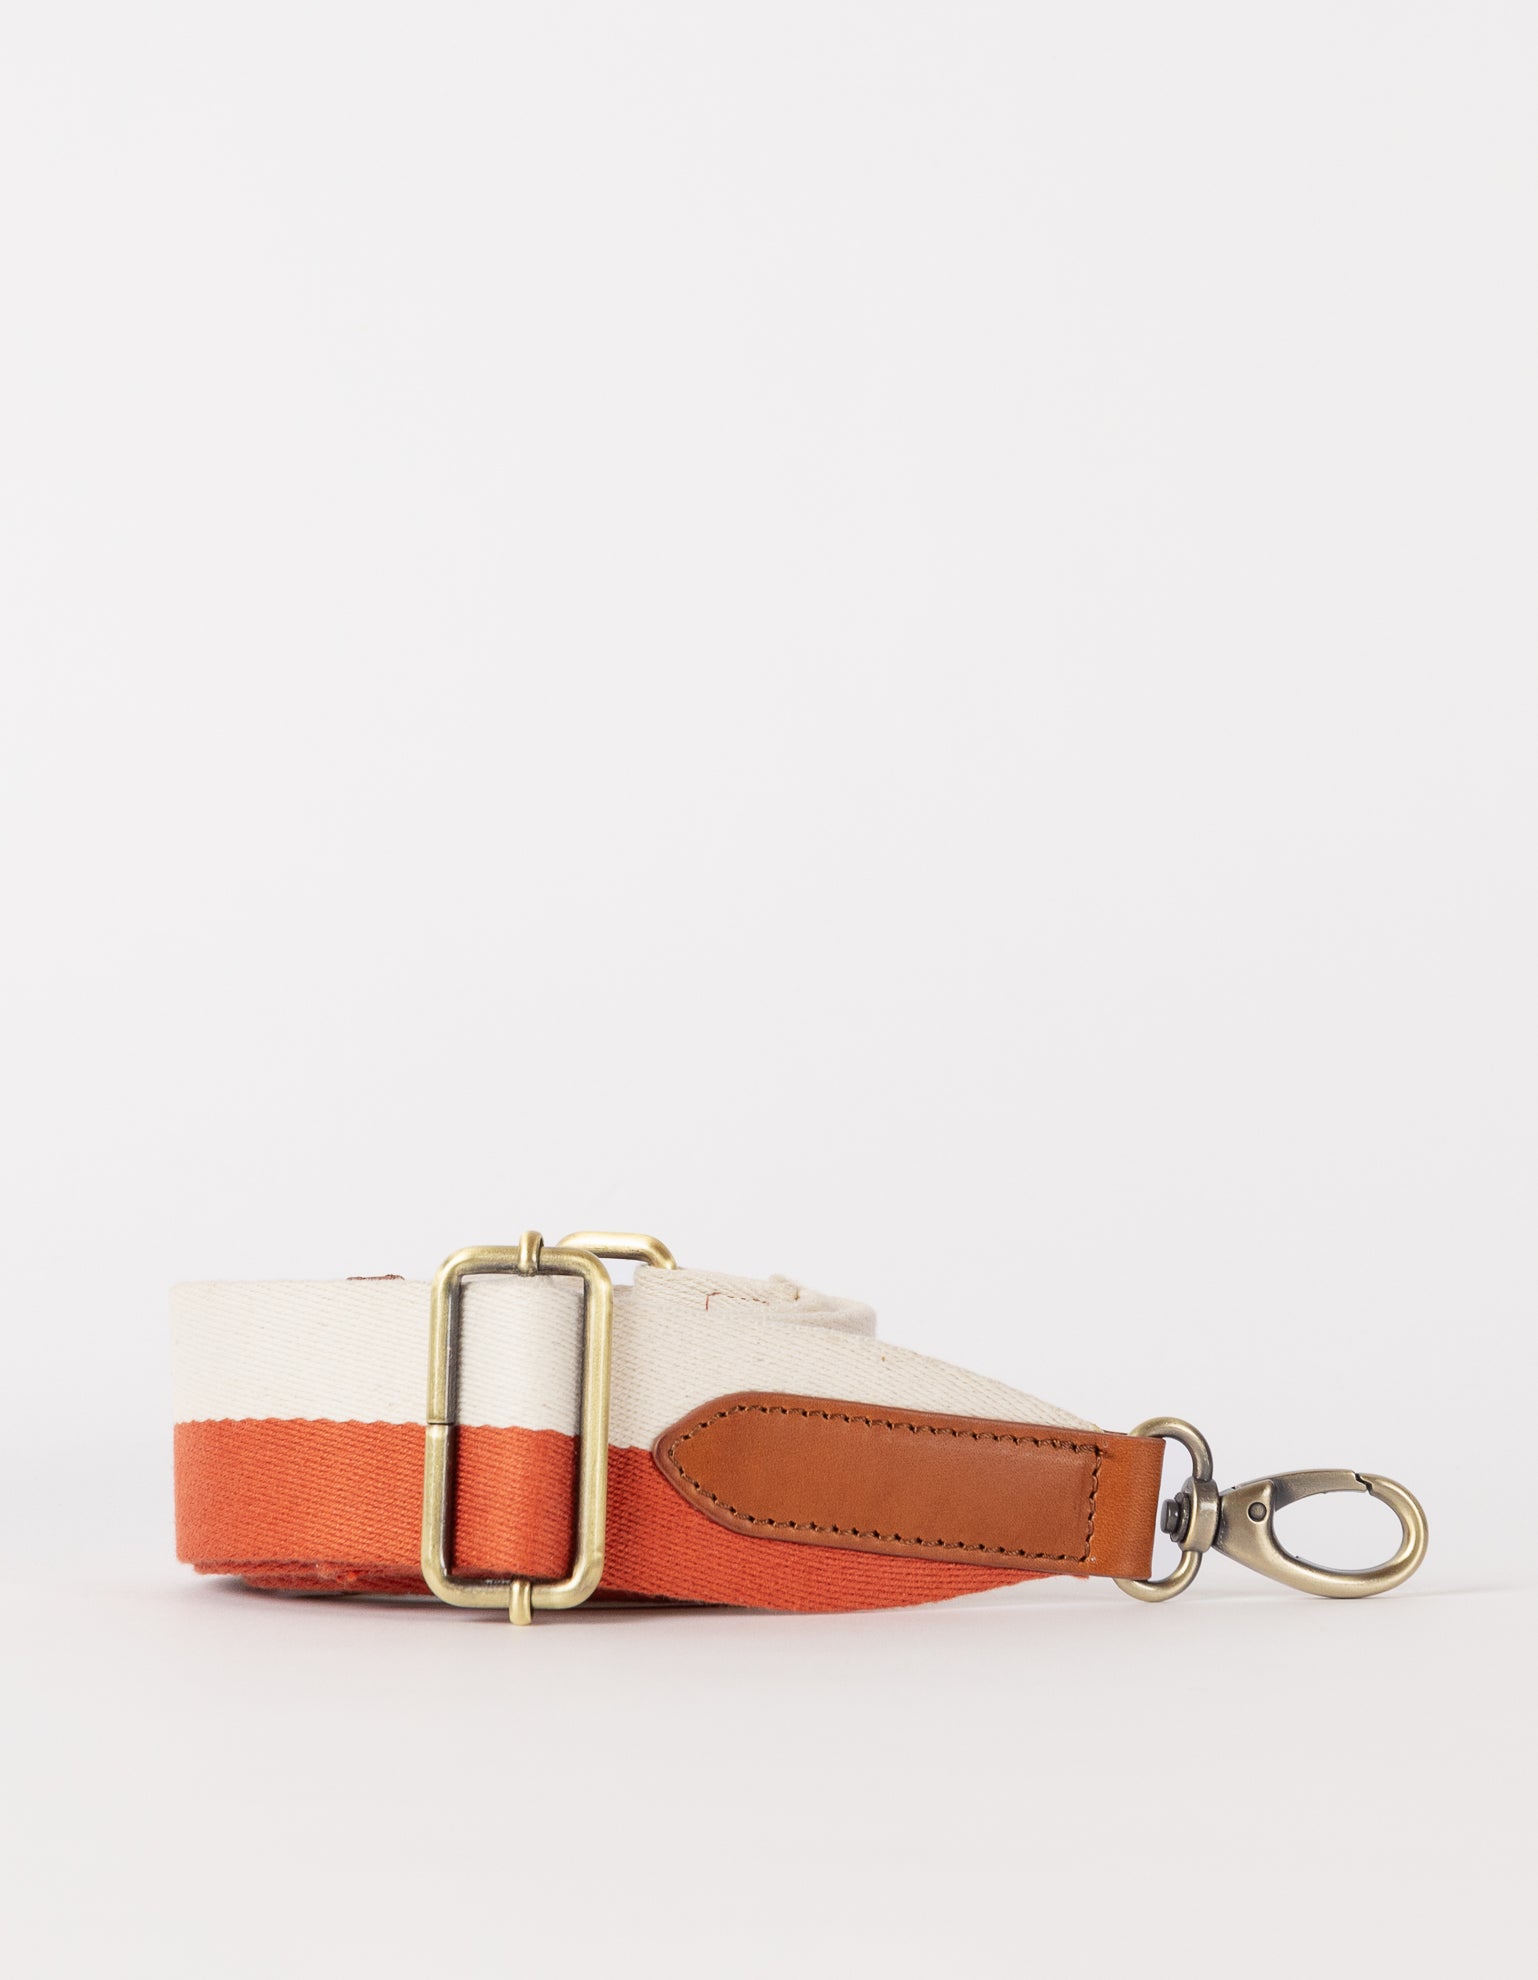 Striped webbing strap with copper and white details - product image